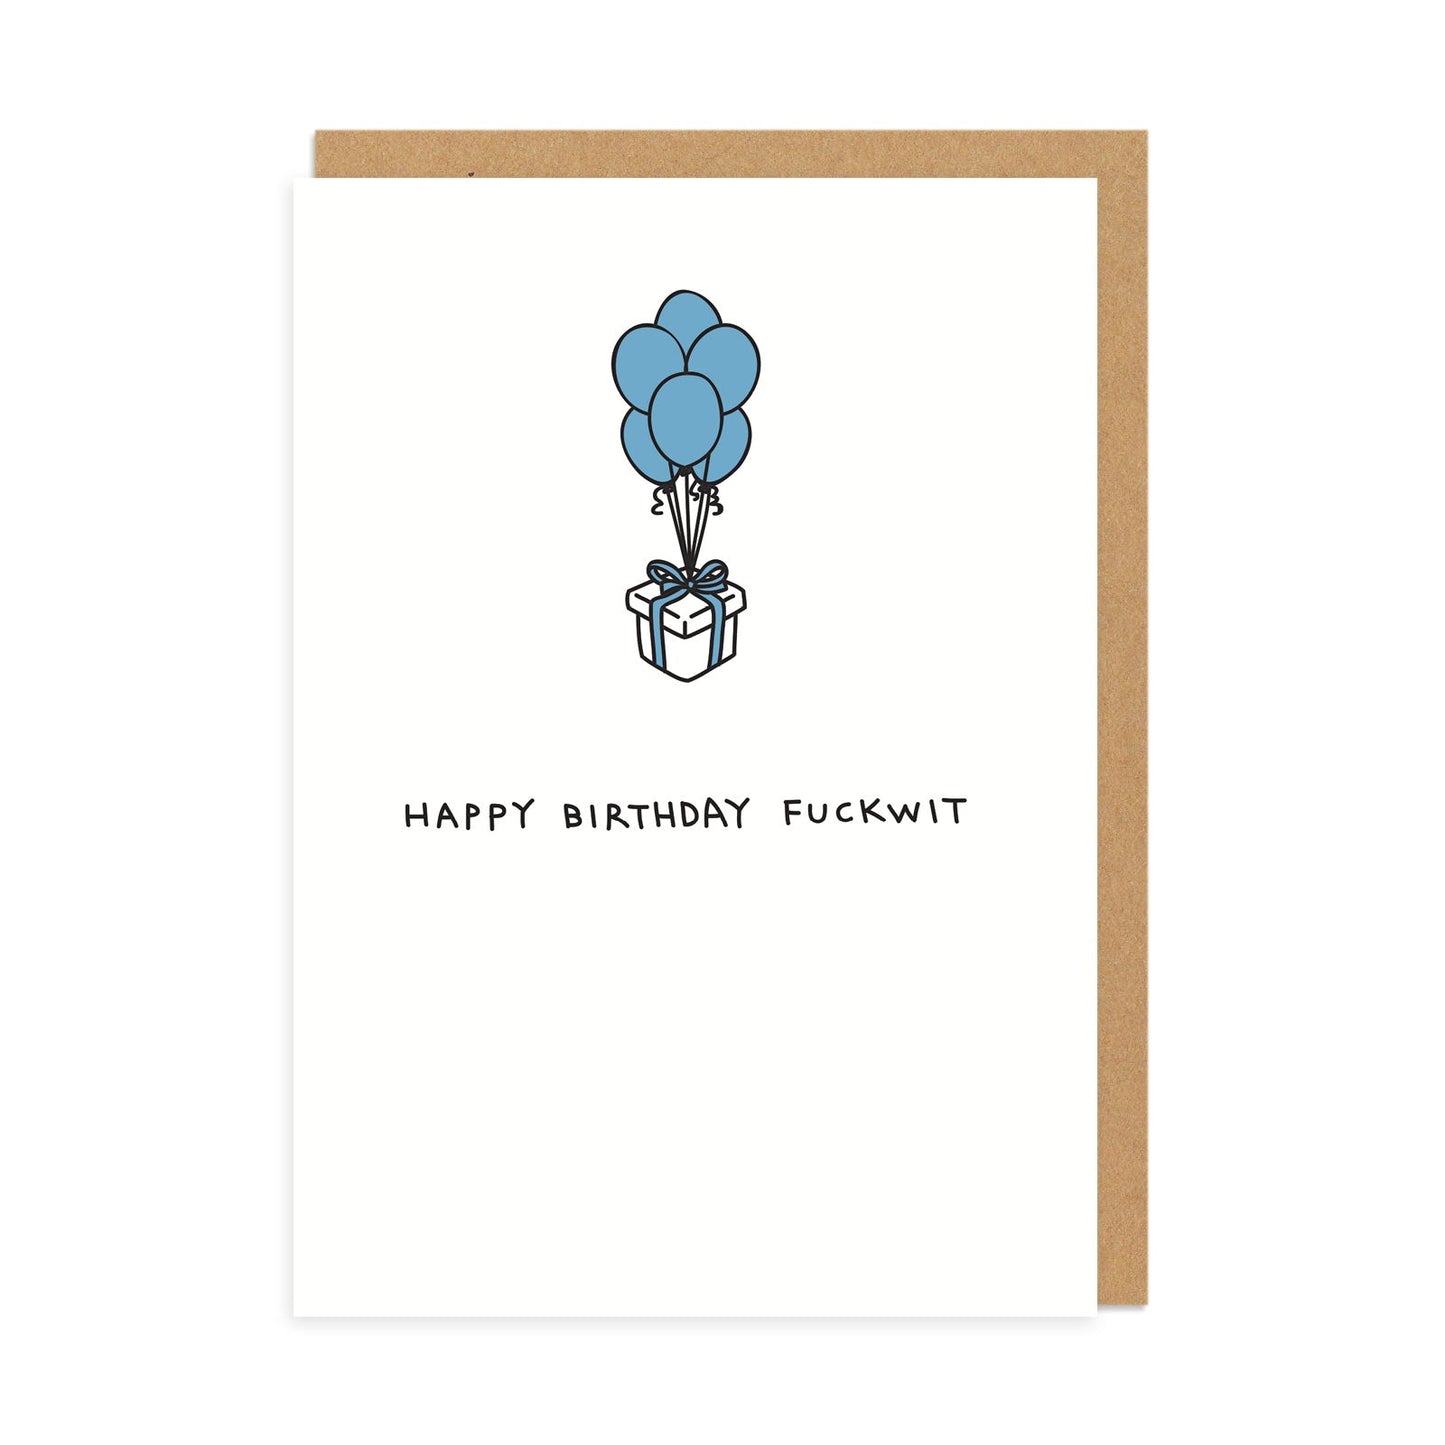 White Birthday Card featuring a present with Balloons attached. Text reads Happy Birthday Fuckwit